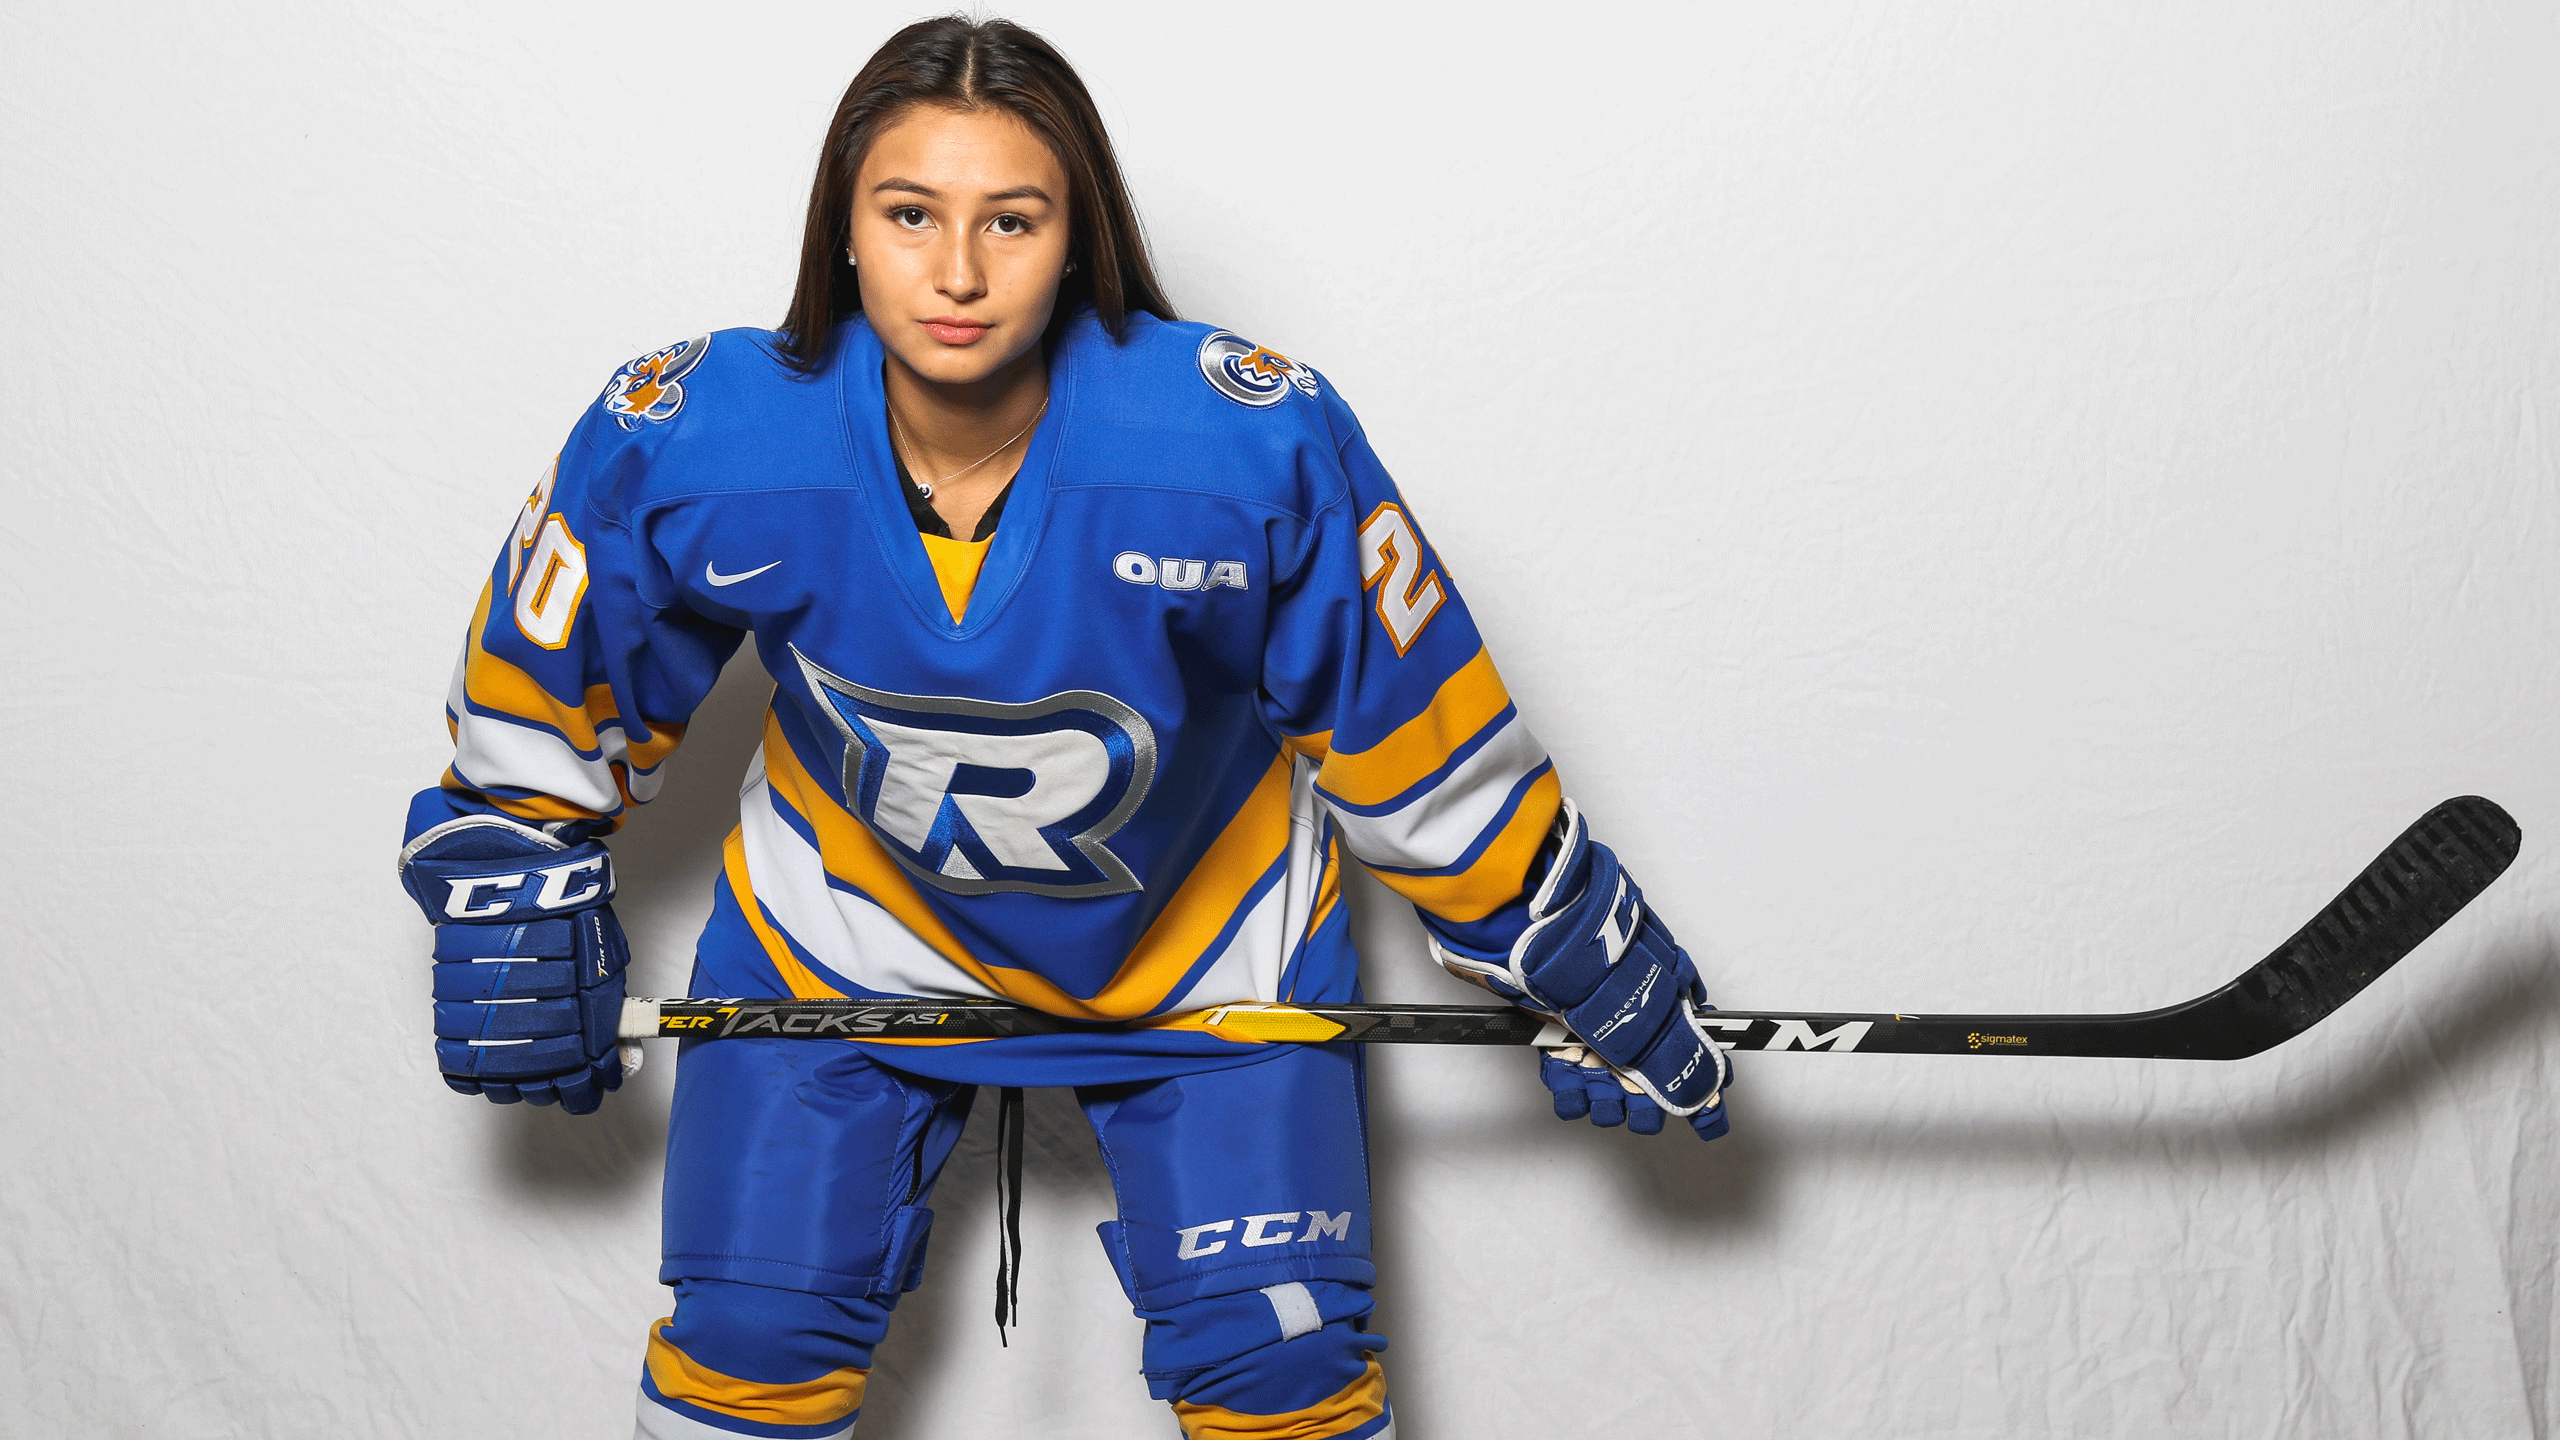 A Rams women's hockey forward in a blue jerseys poses for the camera